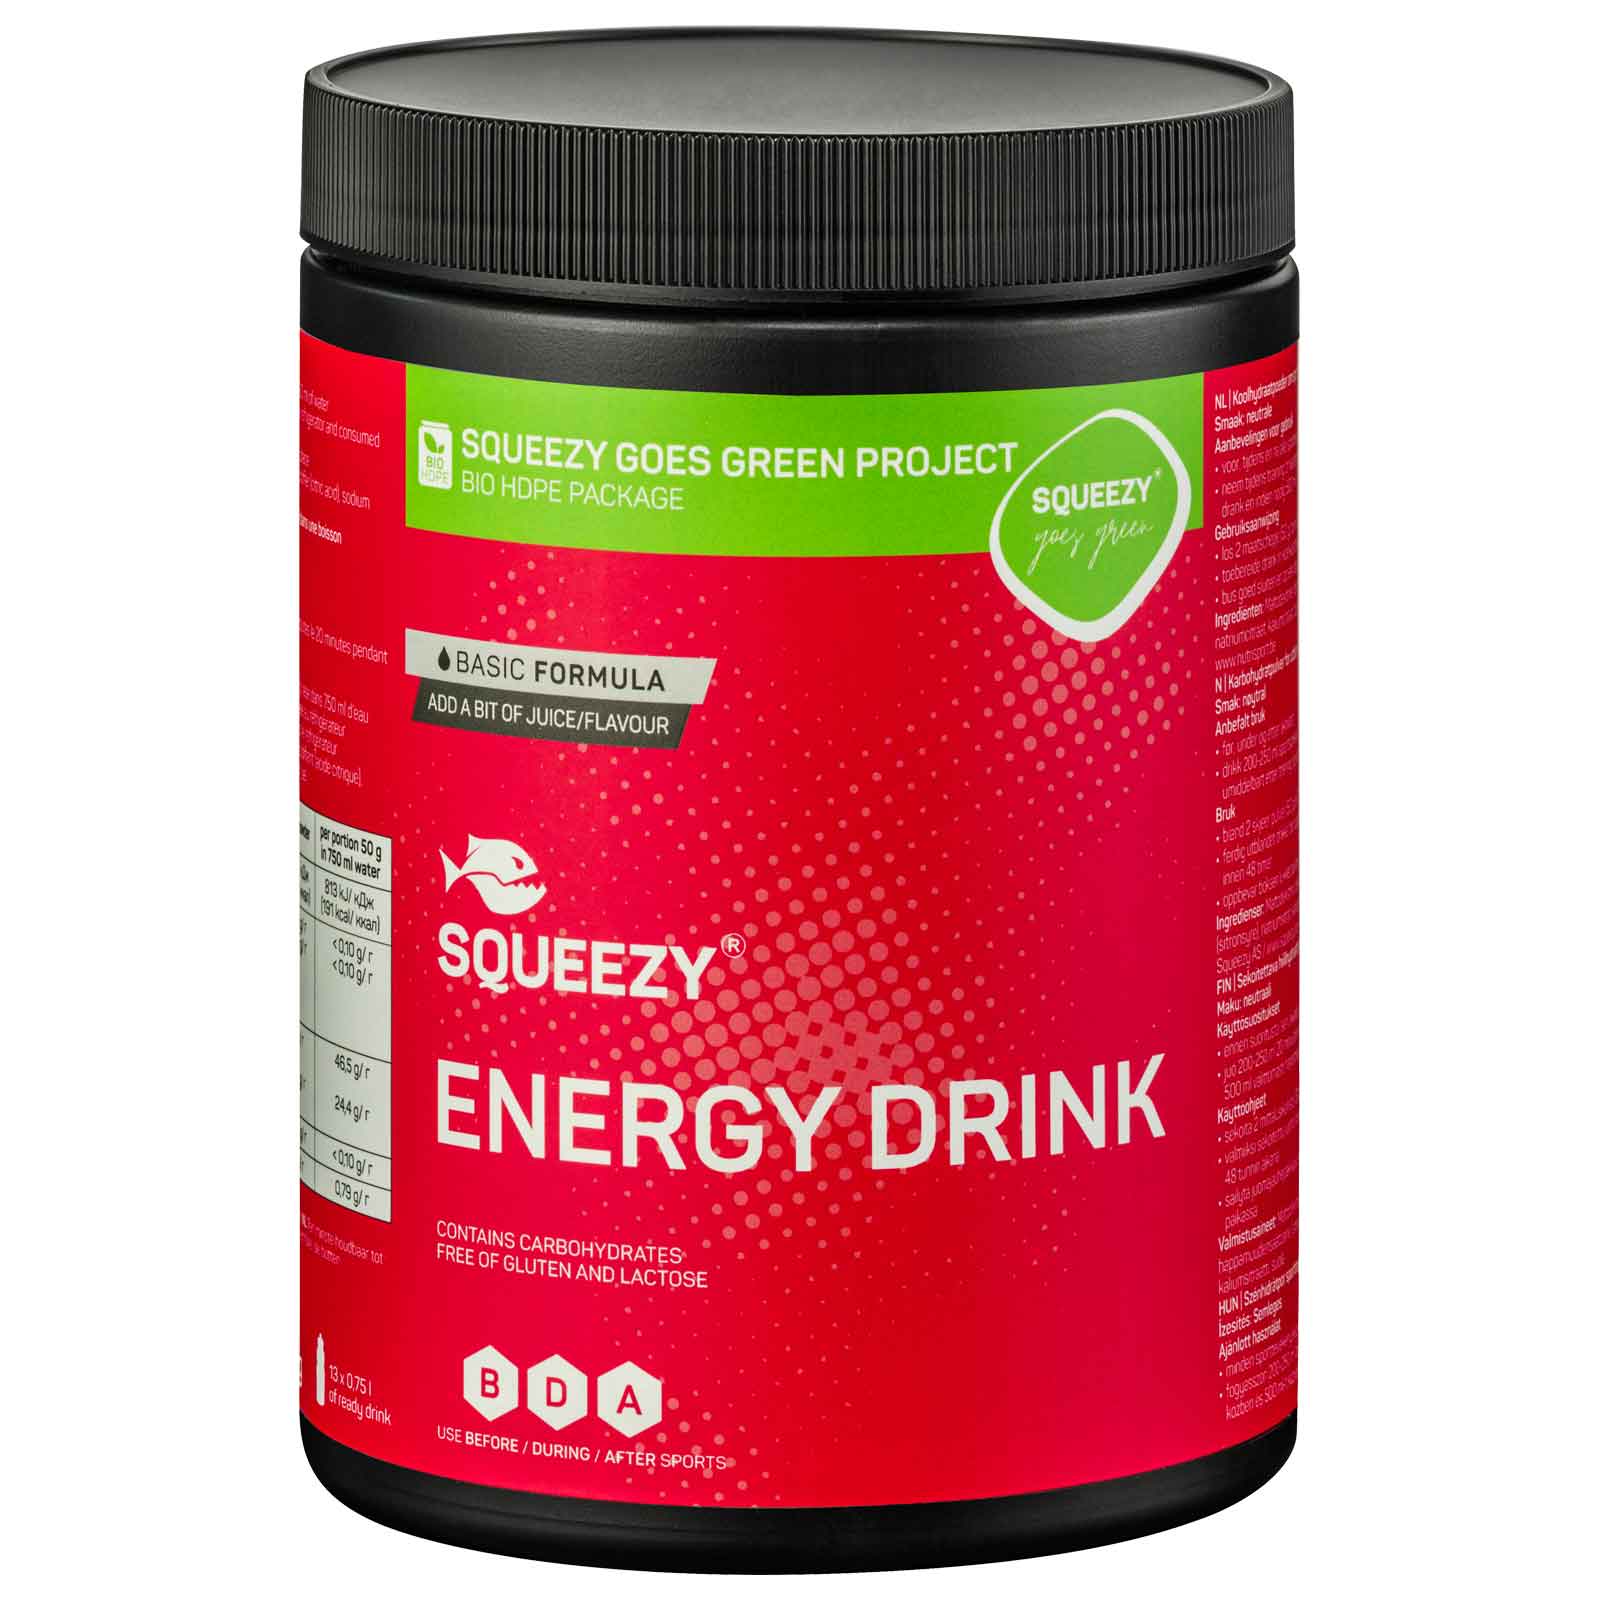 Productfoto van Squeezy Energy Drink Basic Formula - Carbohydrate Beverage Powder - 650g